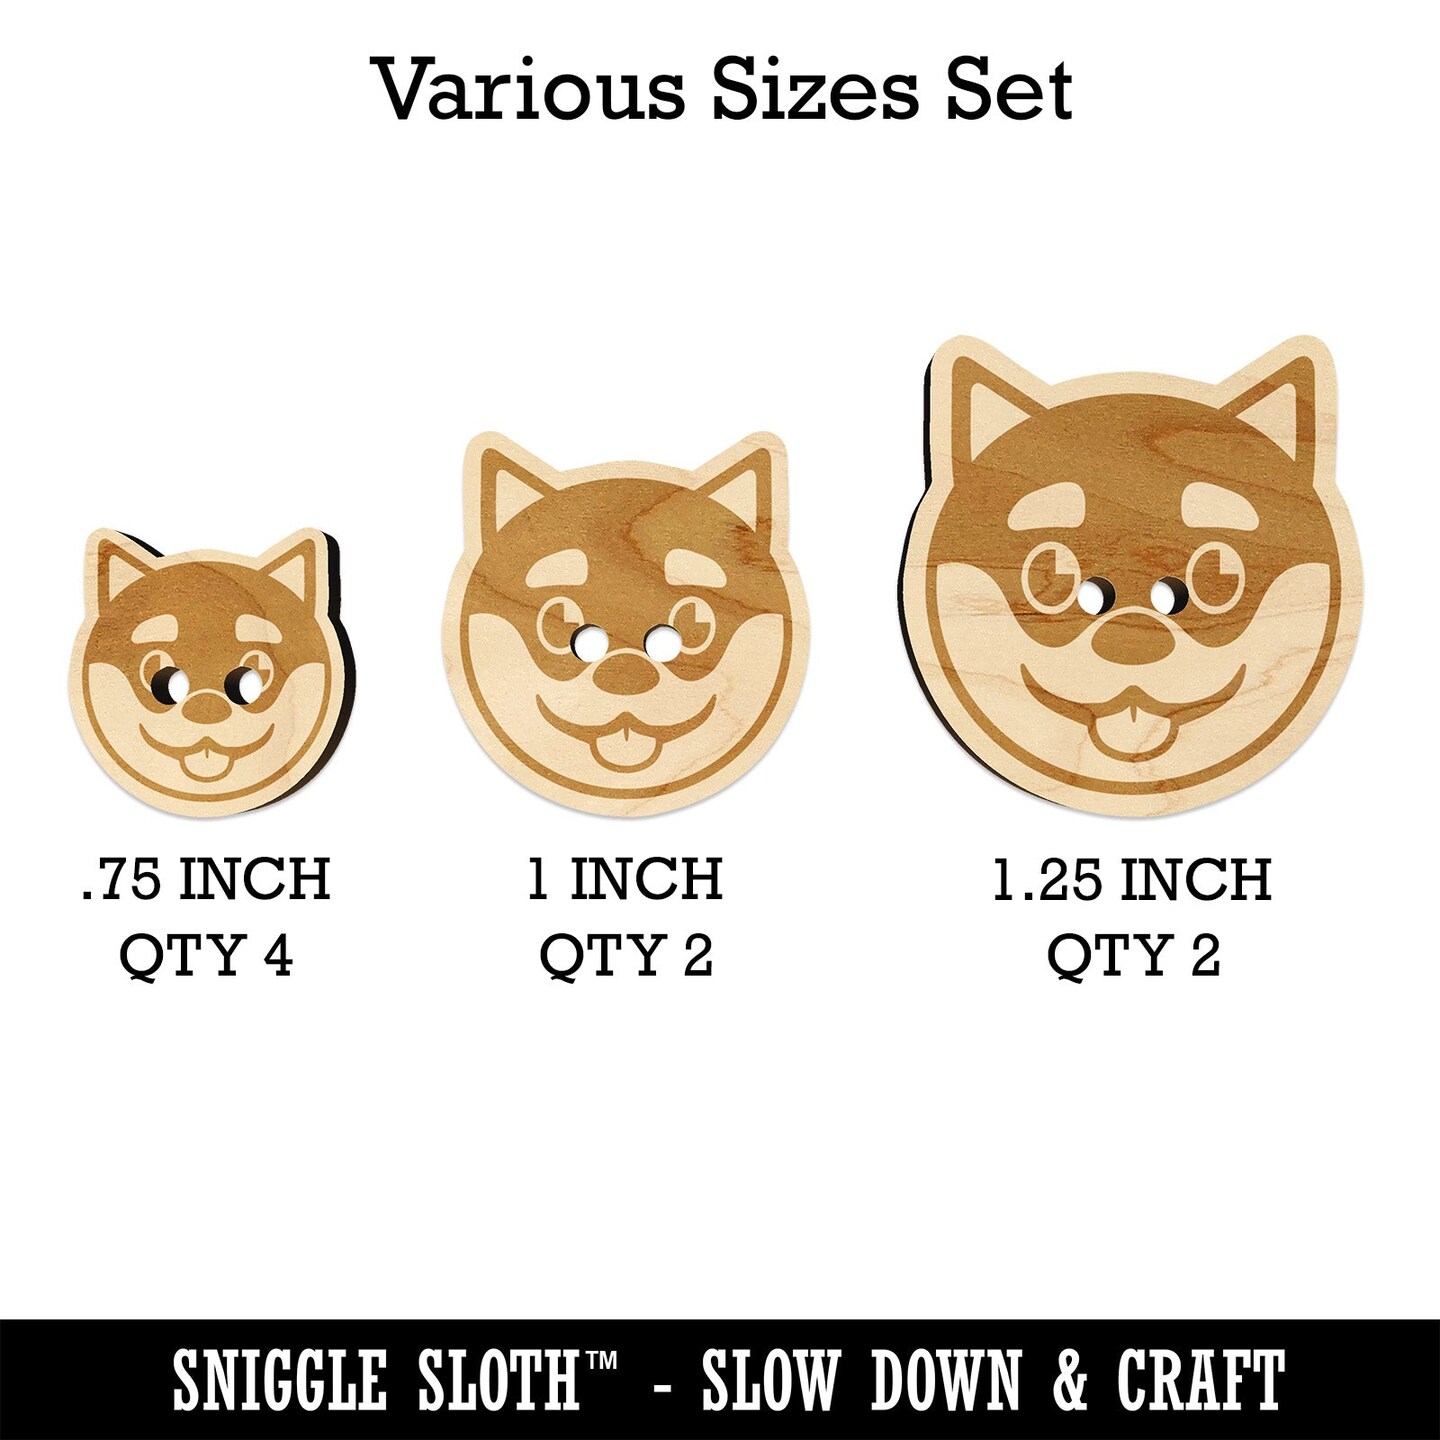 Husky Dog Face Happy Wood Buttons for Sewing Knitting Crochet DIY Craft